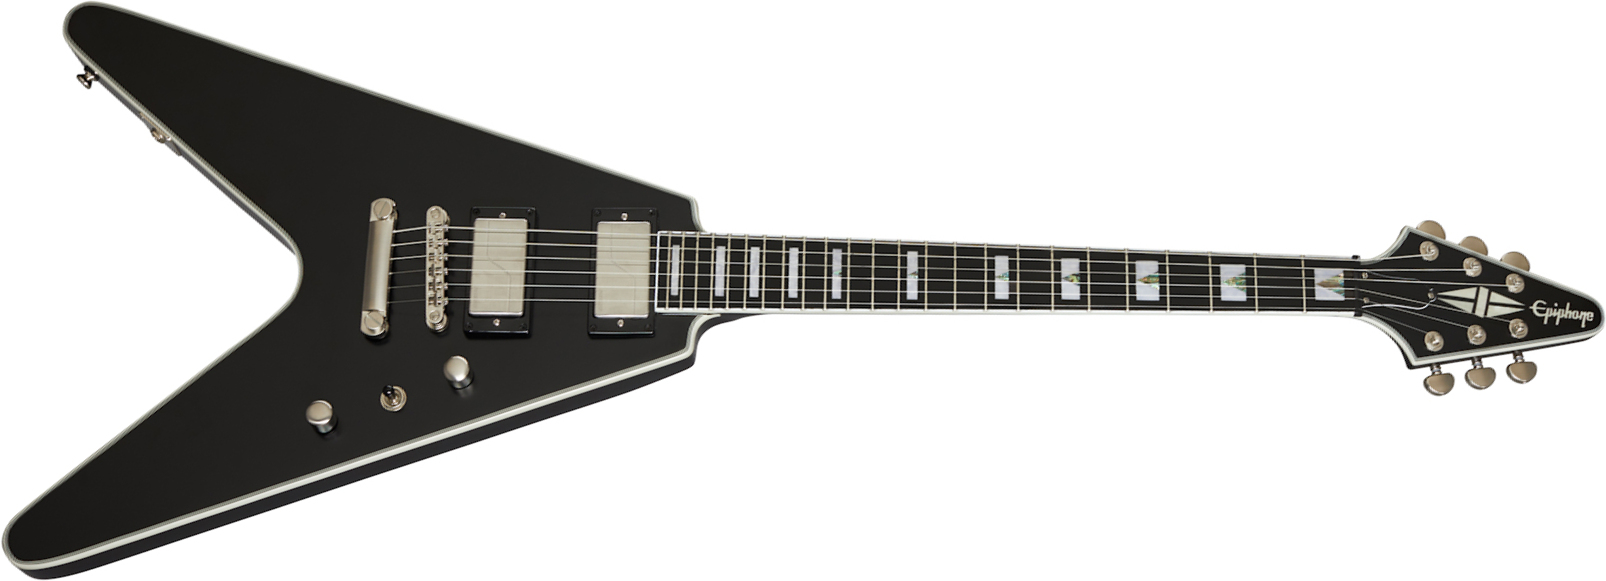 Epiphone Flying V Prophecy Modern 2h Fishman Fluence Ht Eb - Black Aged - Guitarra electrica retro rock - Main picture